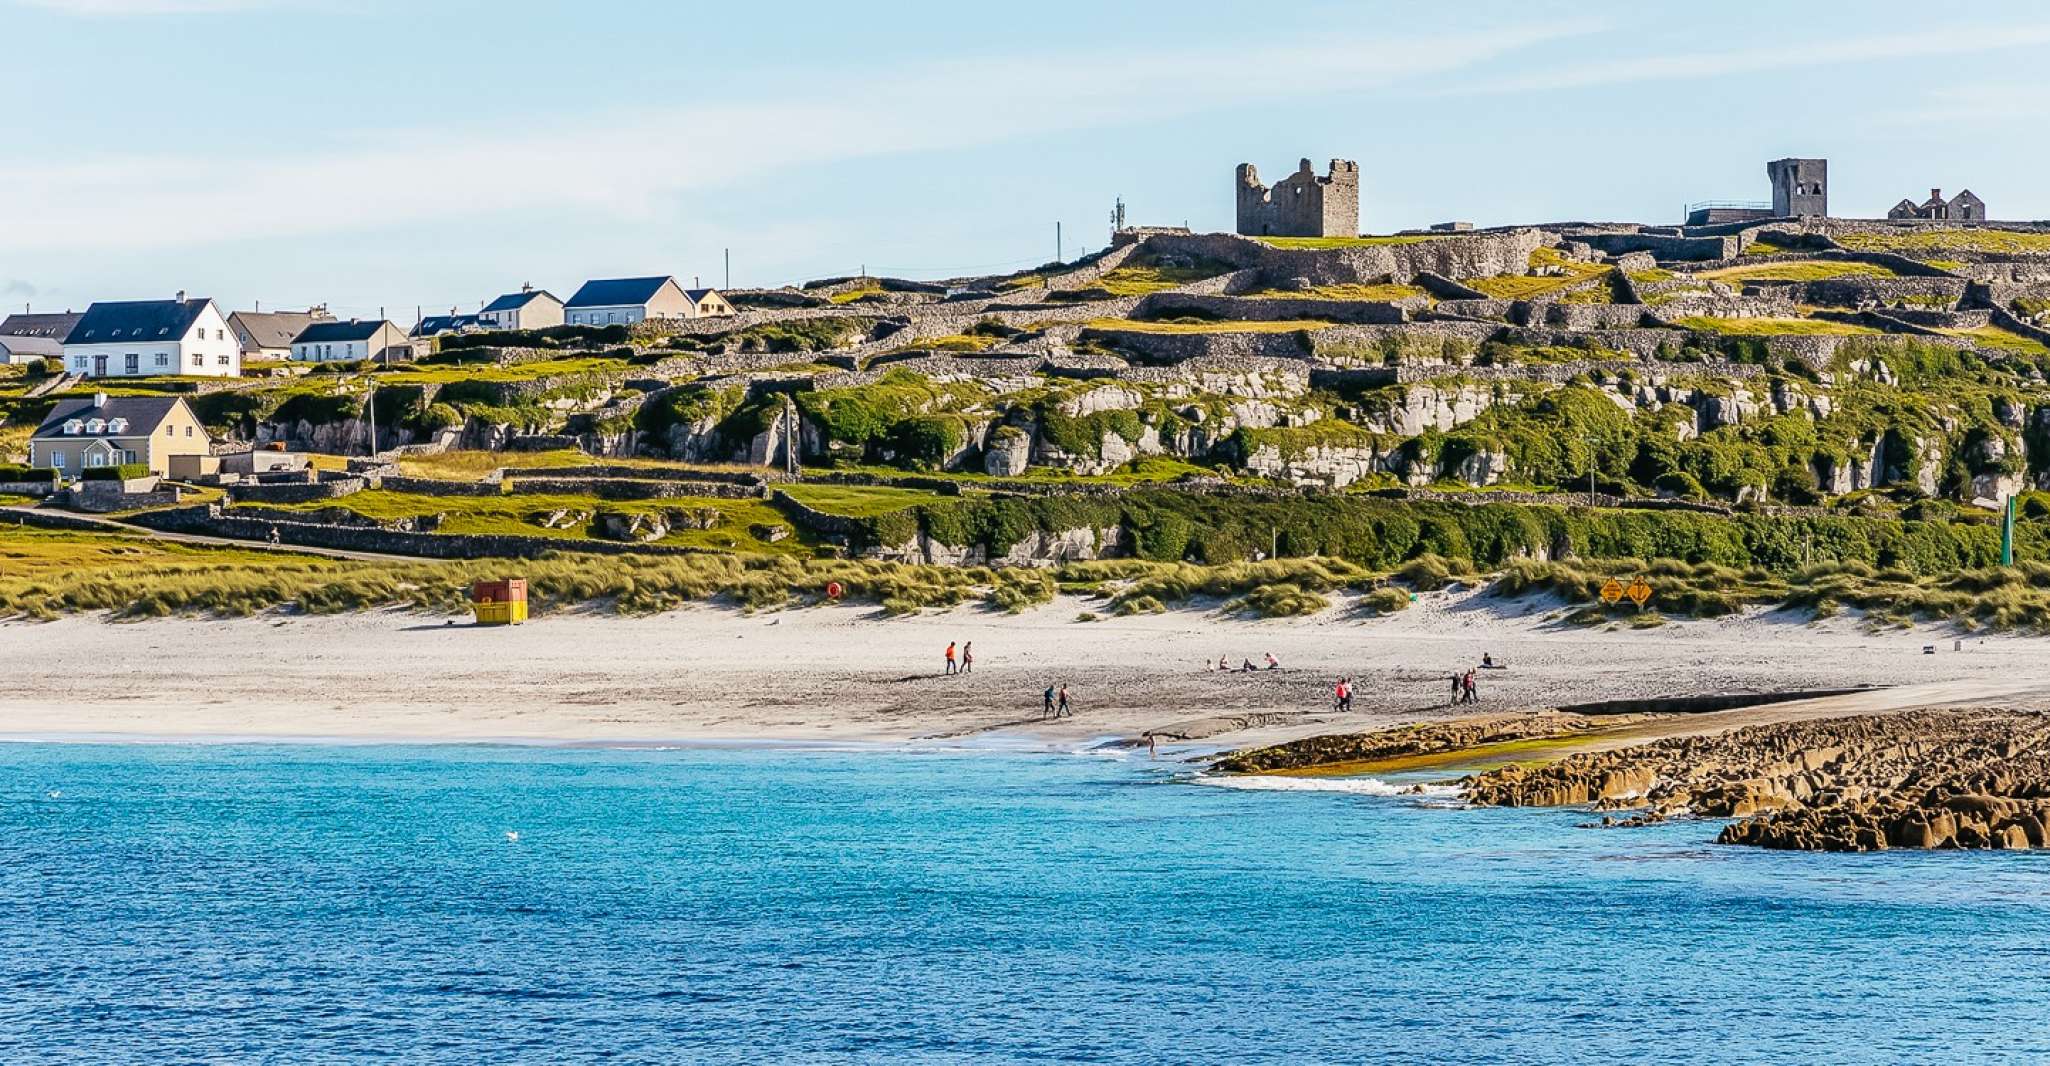 From Galway, Aran Islands Day Trip & Cliffs of Moher Cruise - Housity